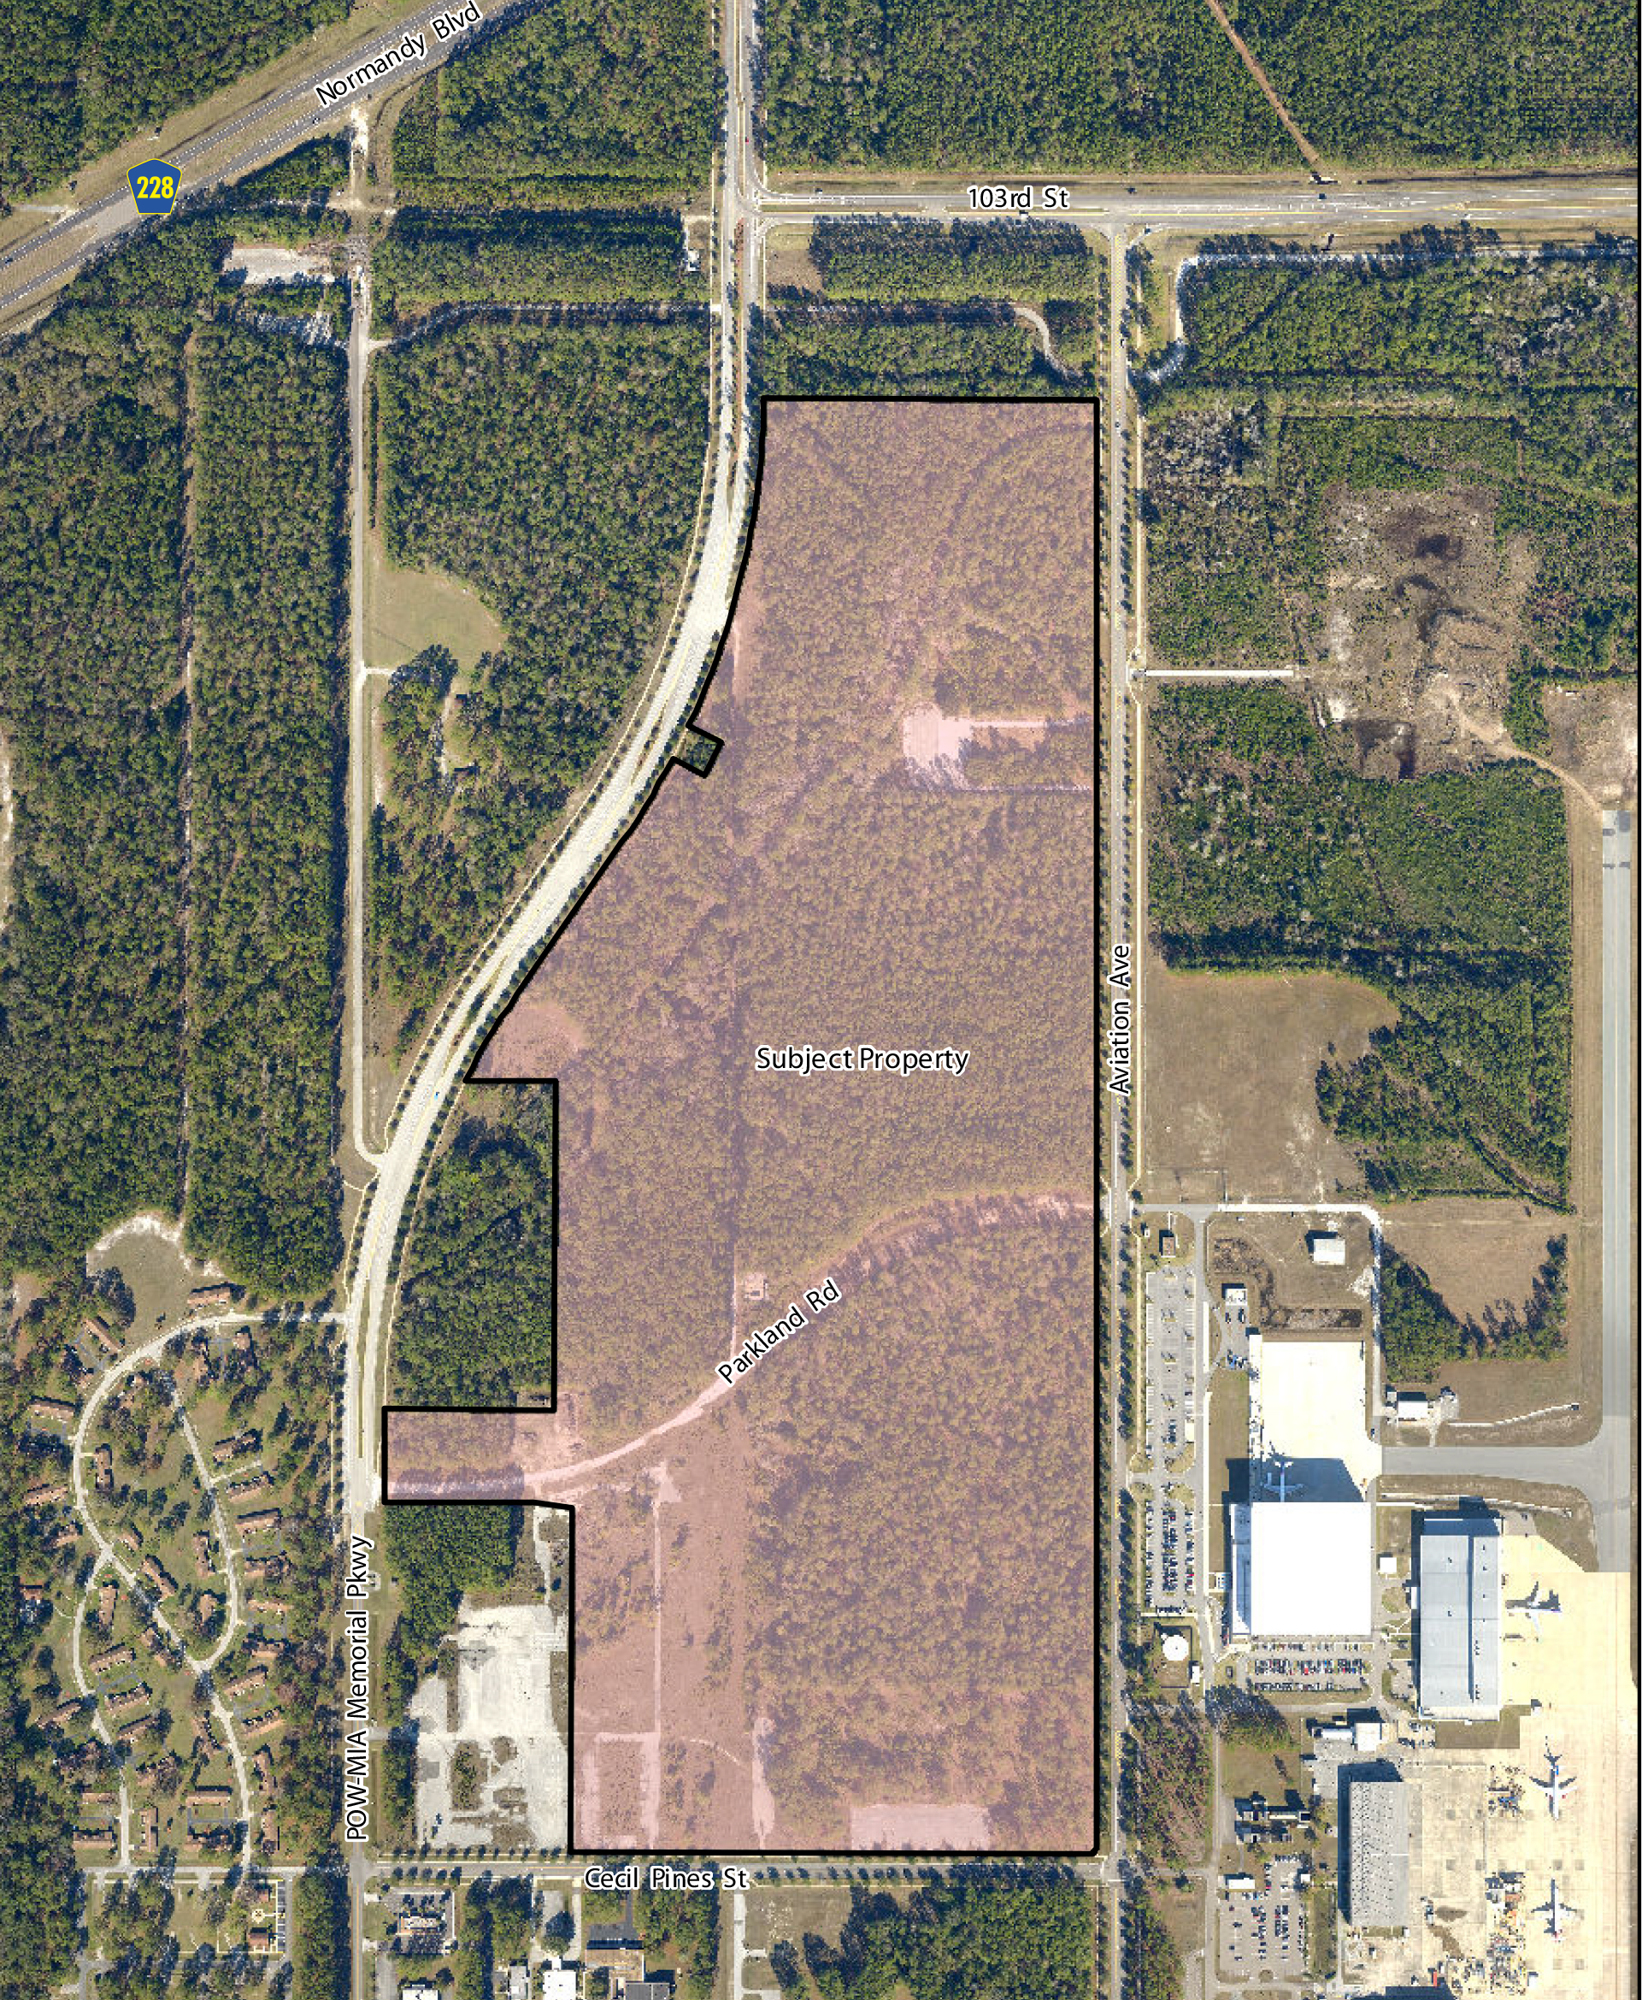 Hillwood filed plans for a 1.5 million-square-foot warehouse for this site at Cecil Commerce Center.